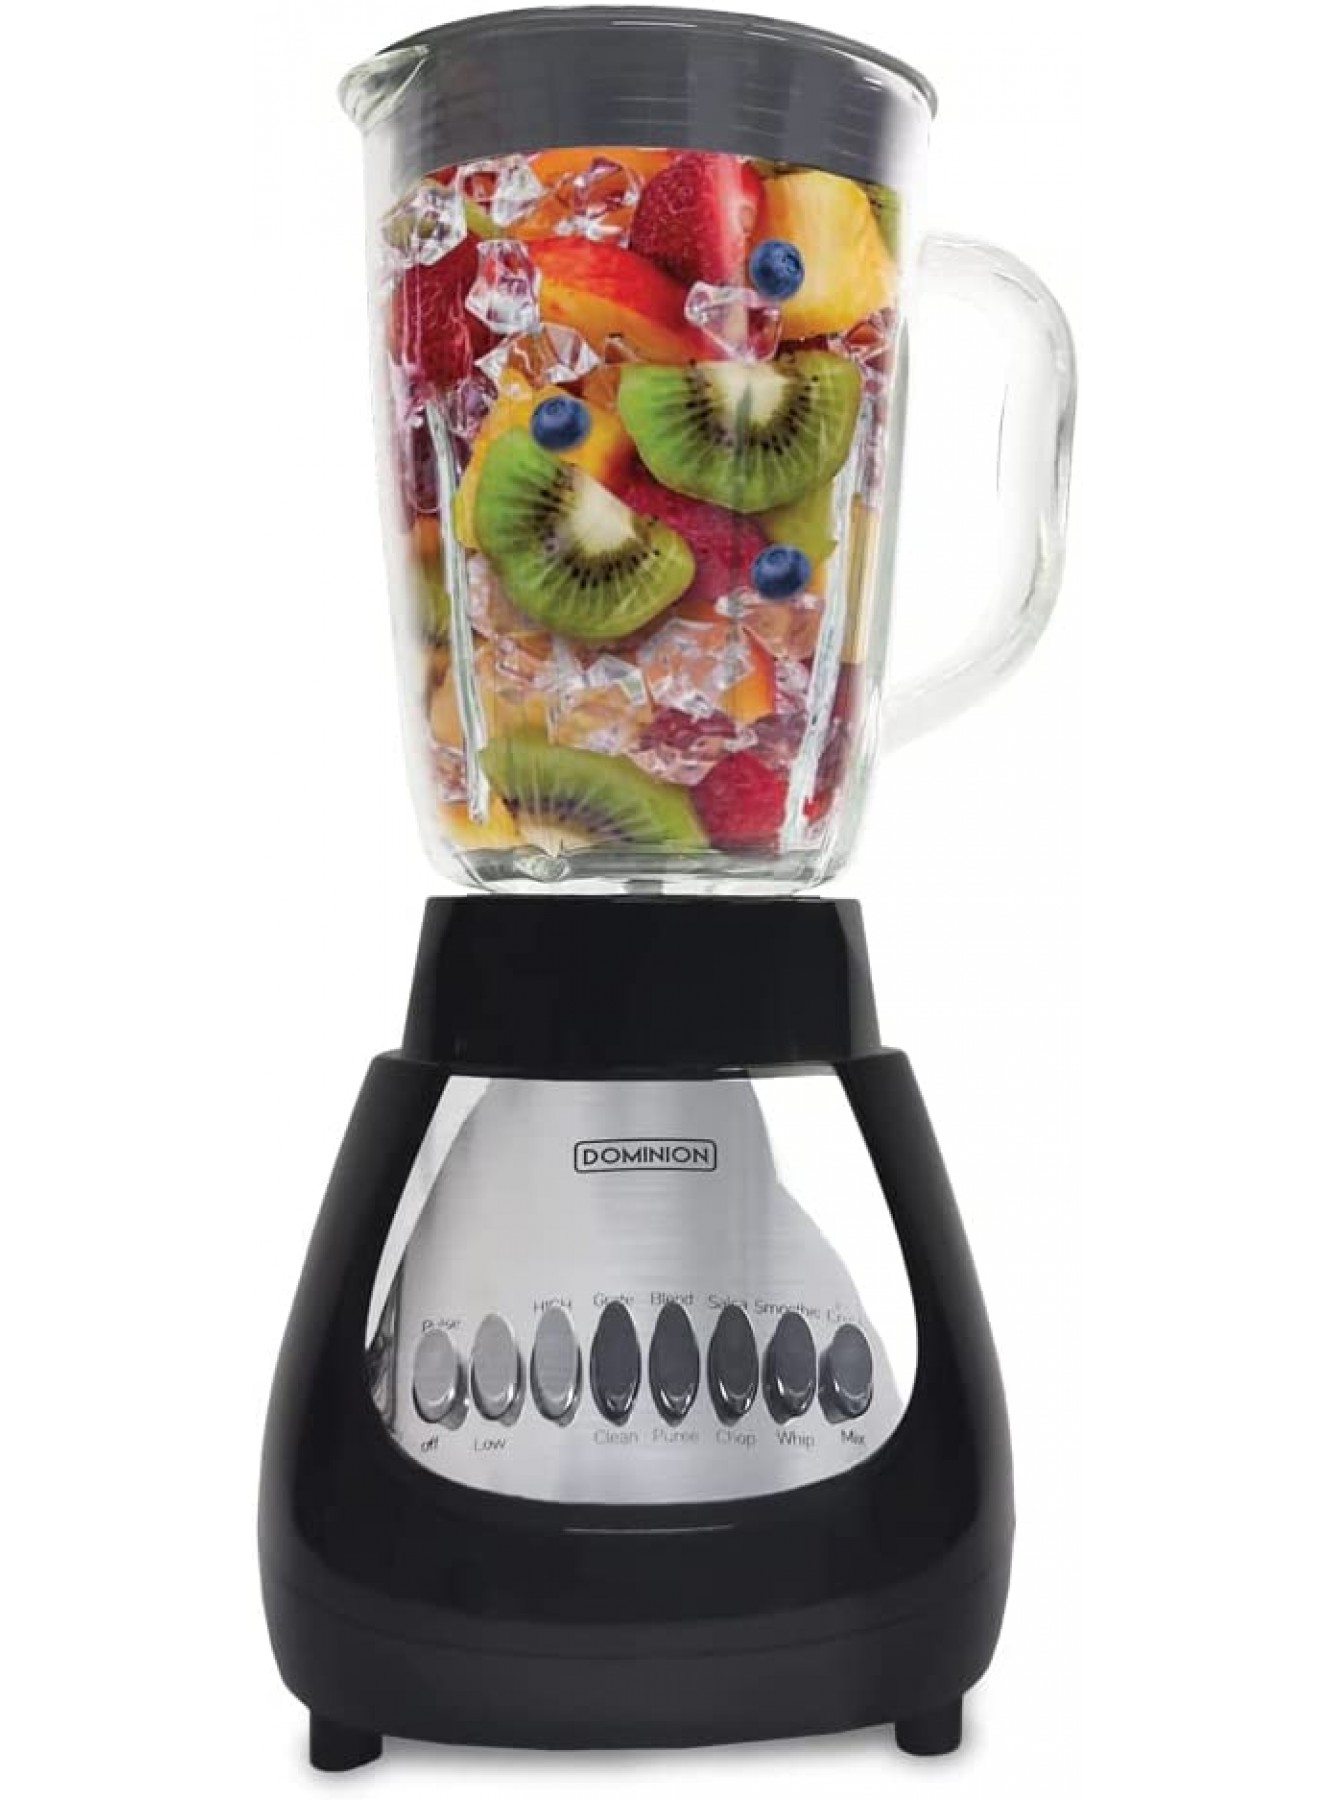 Dominion D4002BG Countertop Blender with 5-Cup Glass Jar 42oz 10-Speed Settings with Pulse Function Sharp Stainless Steel Blade Black B0833HPCR1